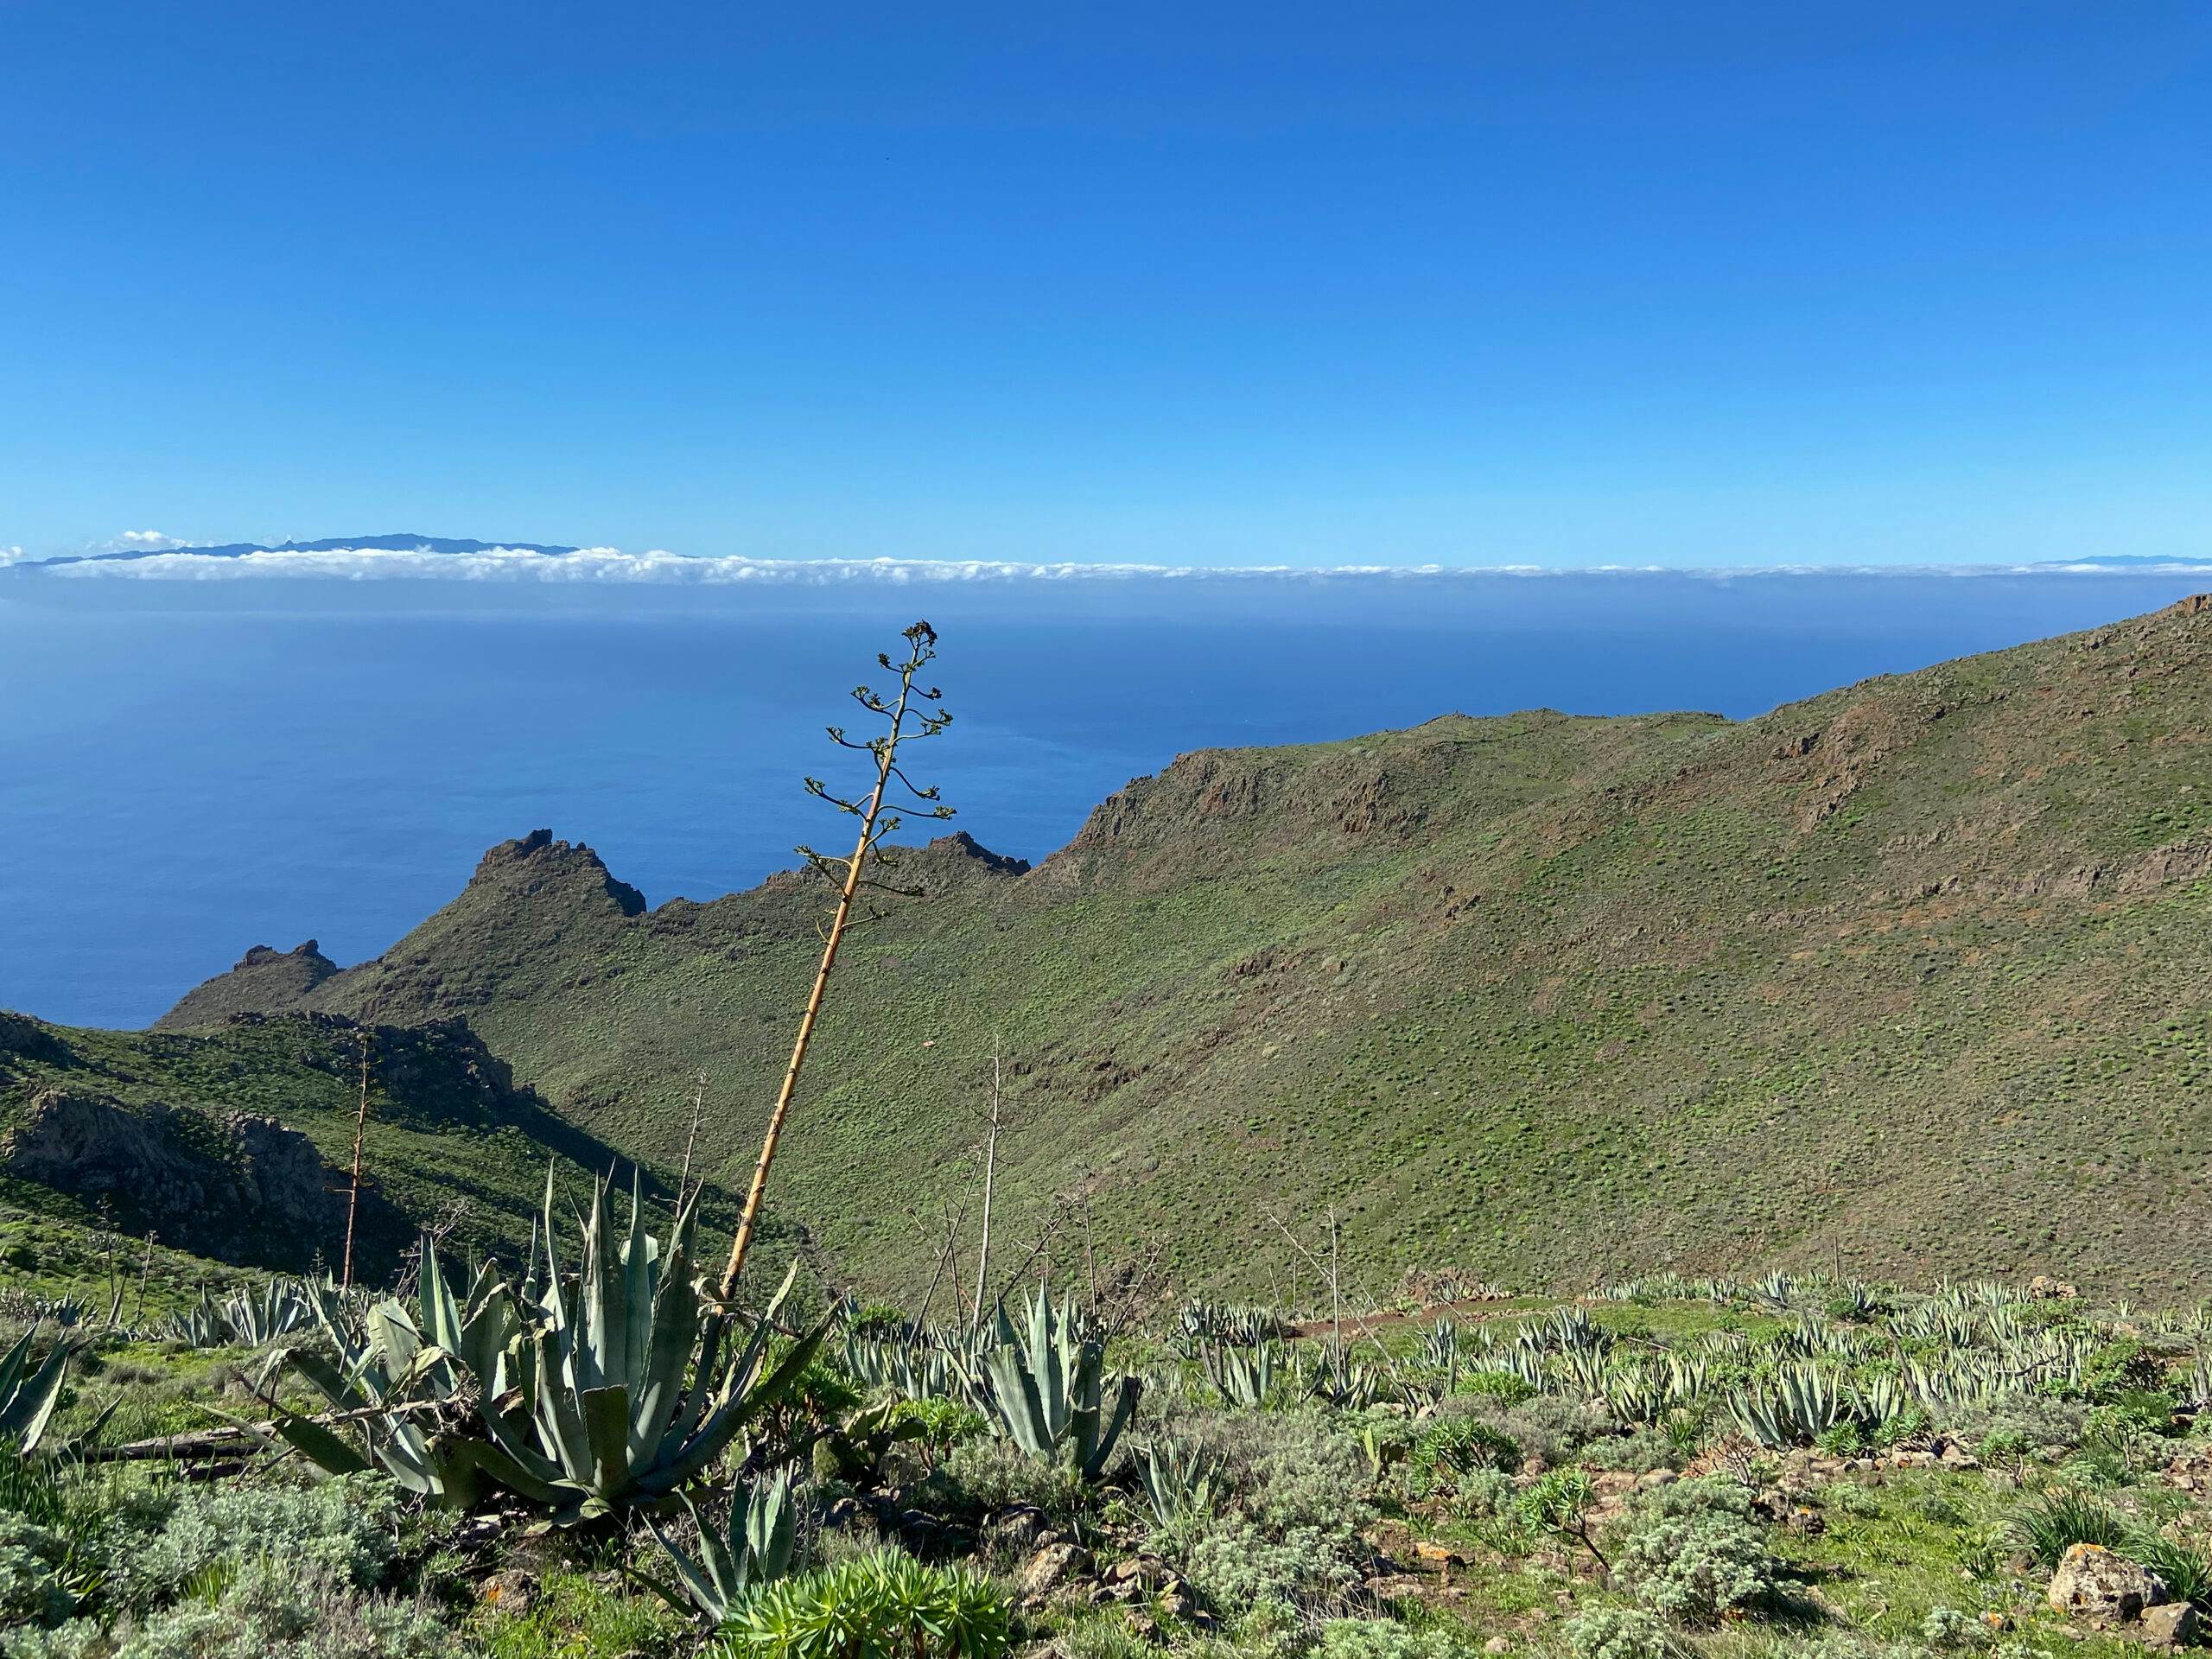 View from the heights of La Gomera and La Palma